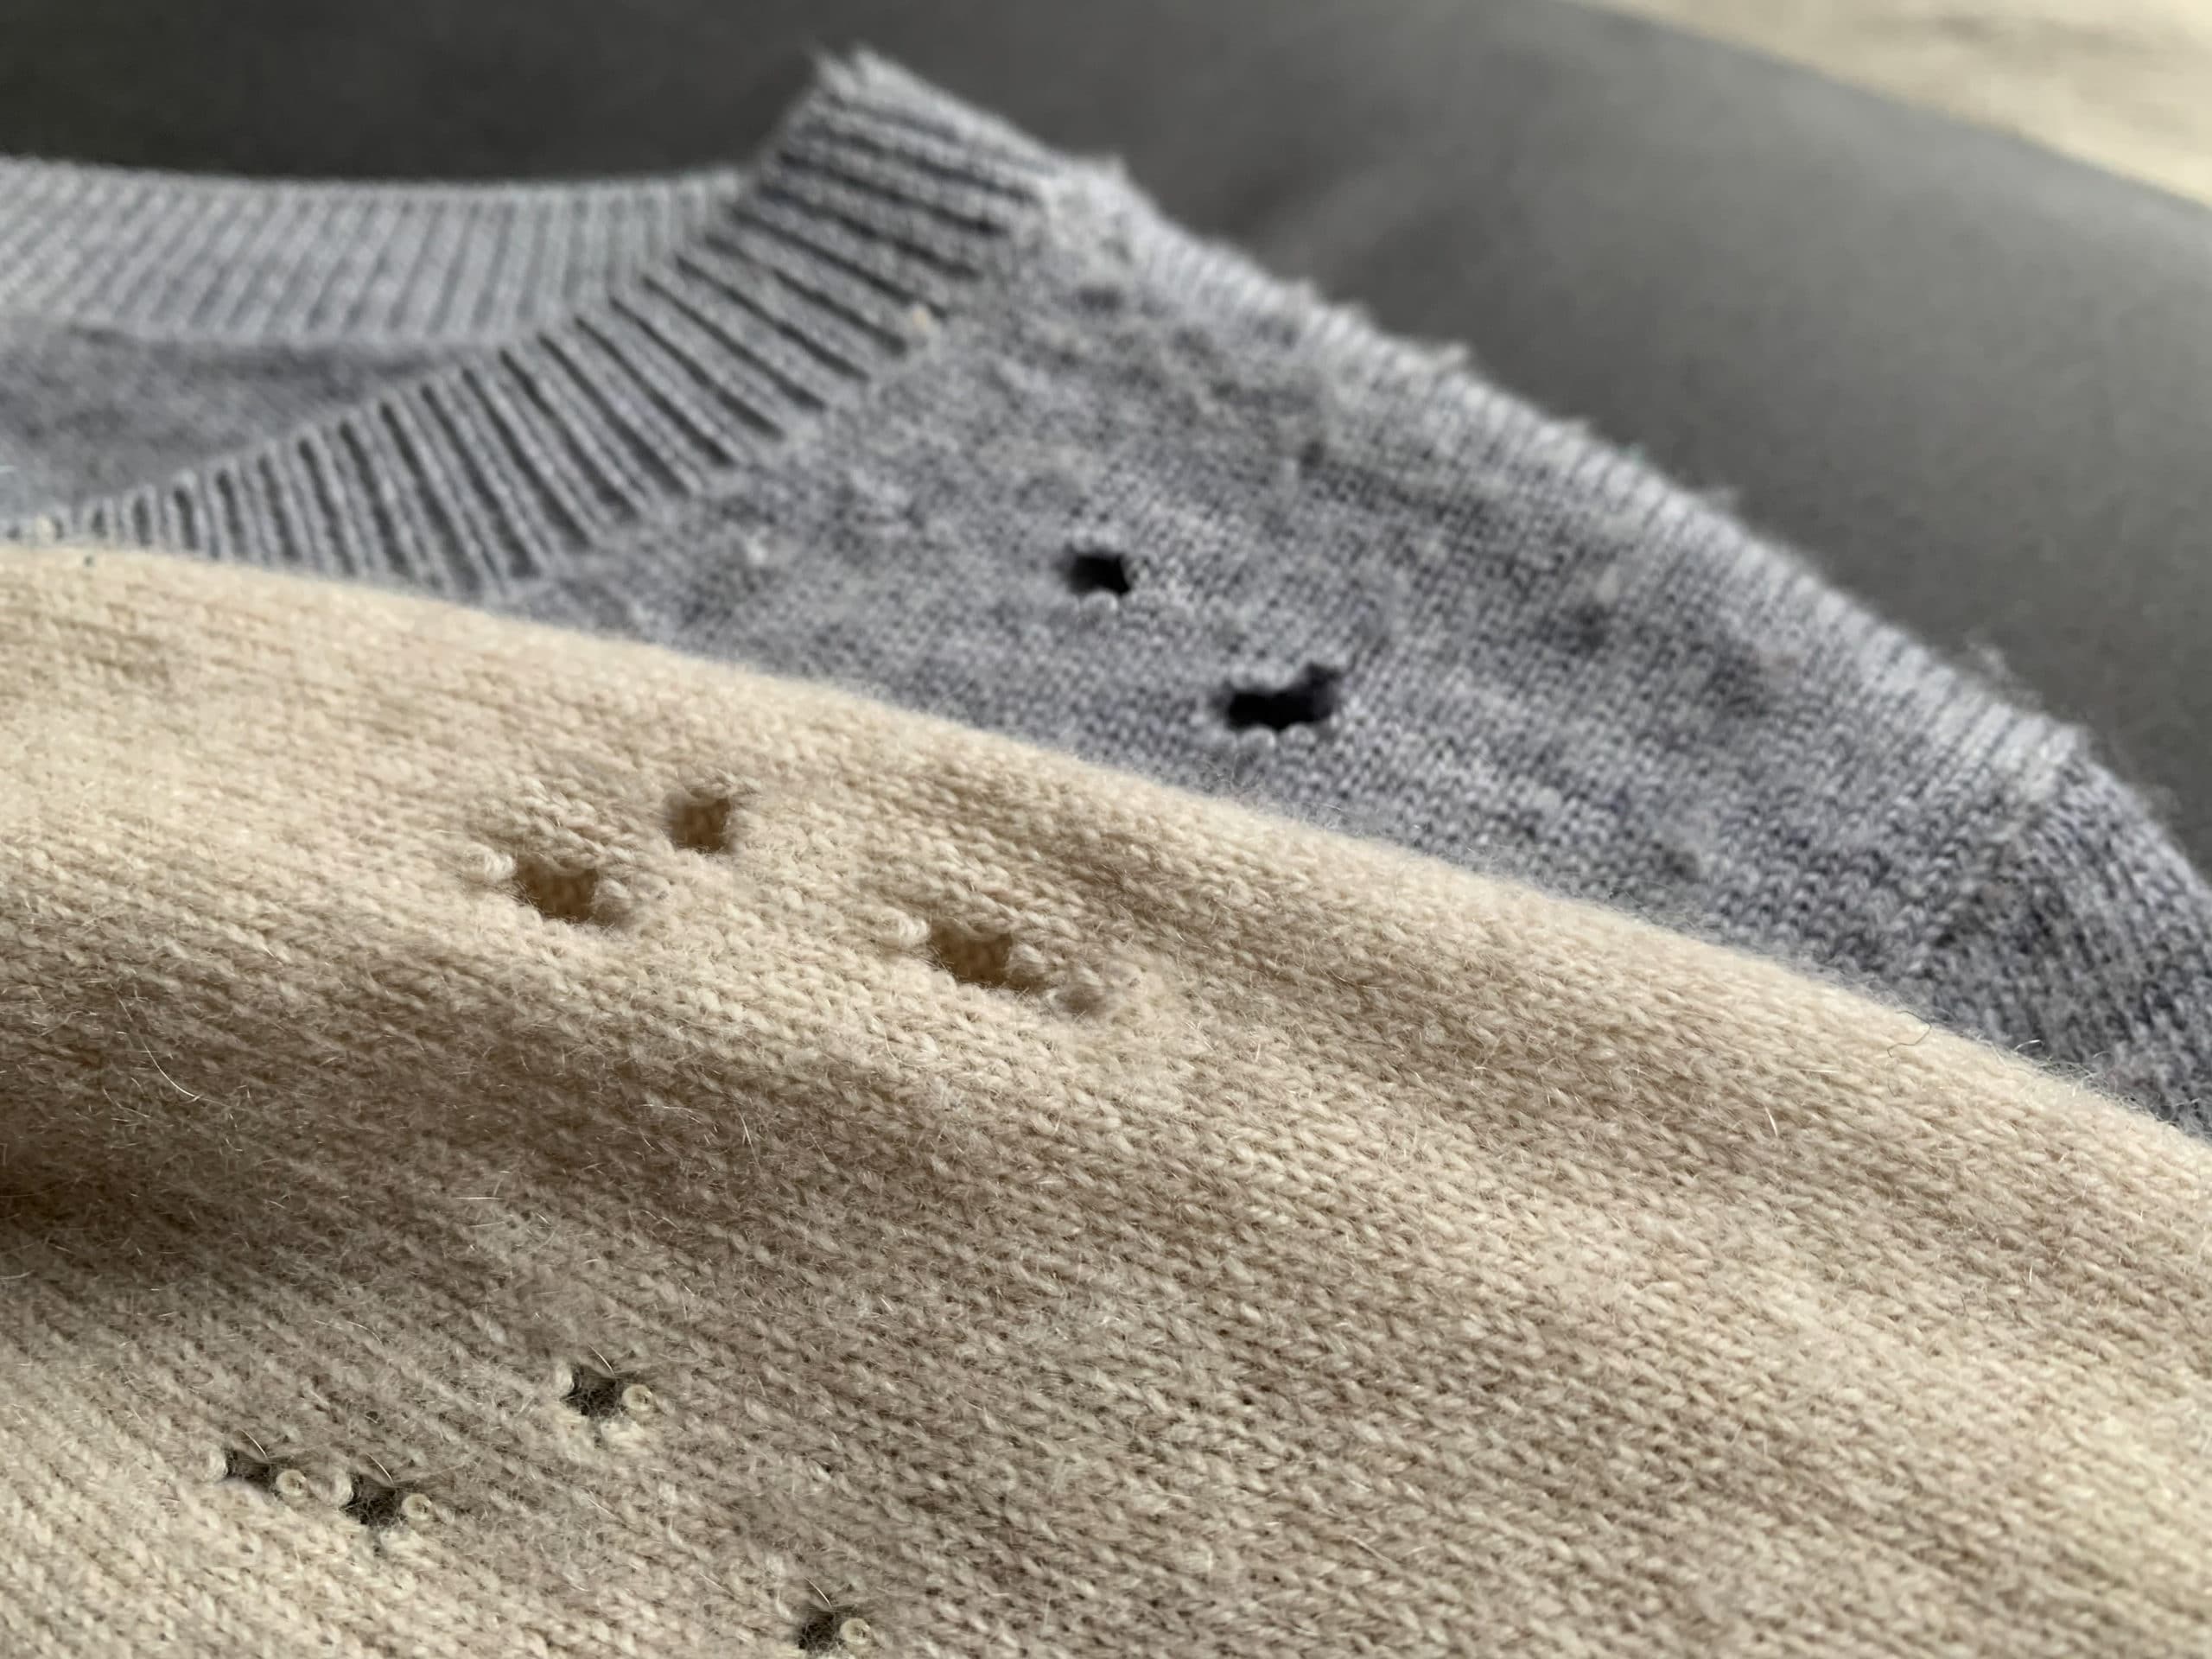 Two expensive cashmere sweaters with holes and damaged, caused by clothes moths